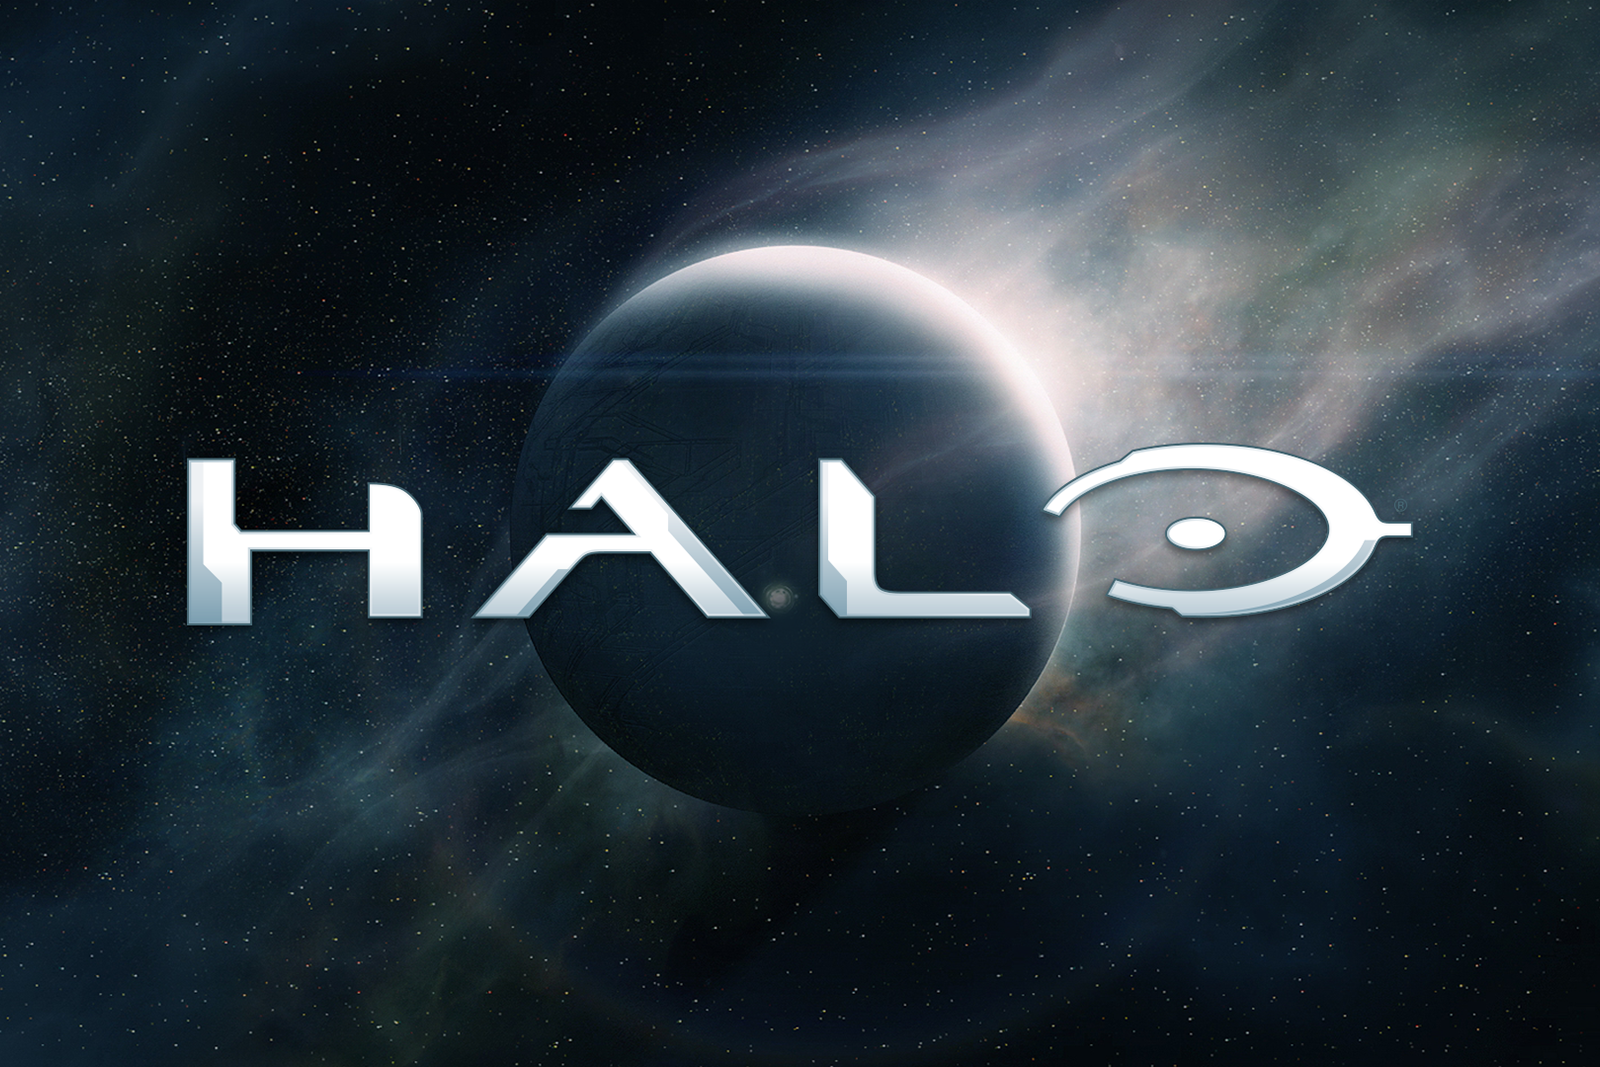 Showtime is turning game franchise Halo into a TV show image 1